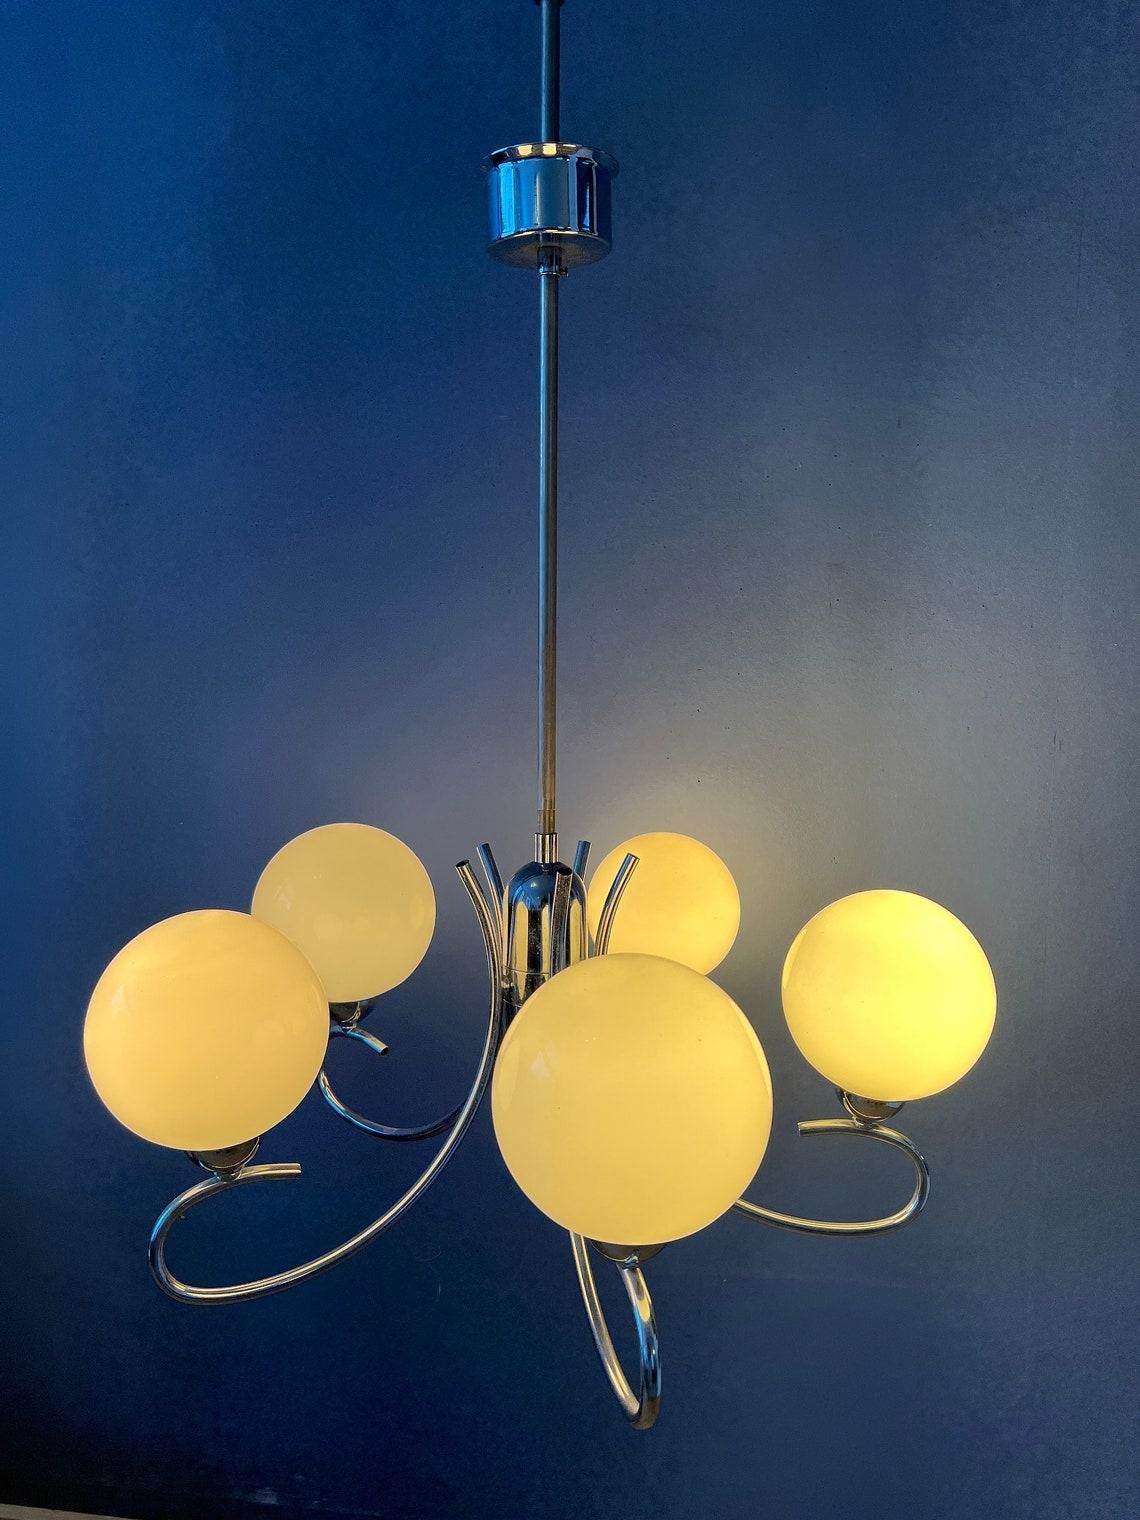 Mid century sputnik space age glass chandelier. The light fixture has a chrome frame and five opaline glass shades. The lamp requires five E14 lightbulbs.

Additional information:
Materials: Glass, metal
Period: 1970s
Dimensions:ø Chandelier: 65